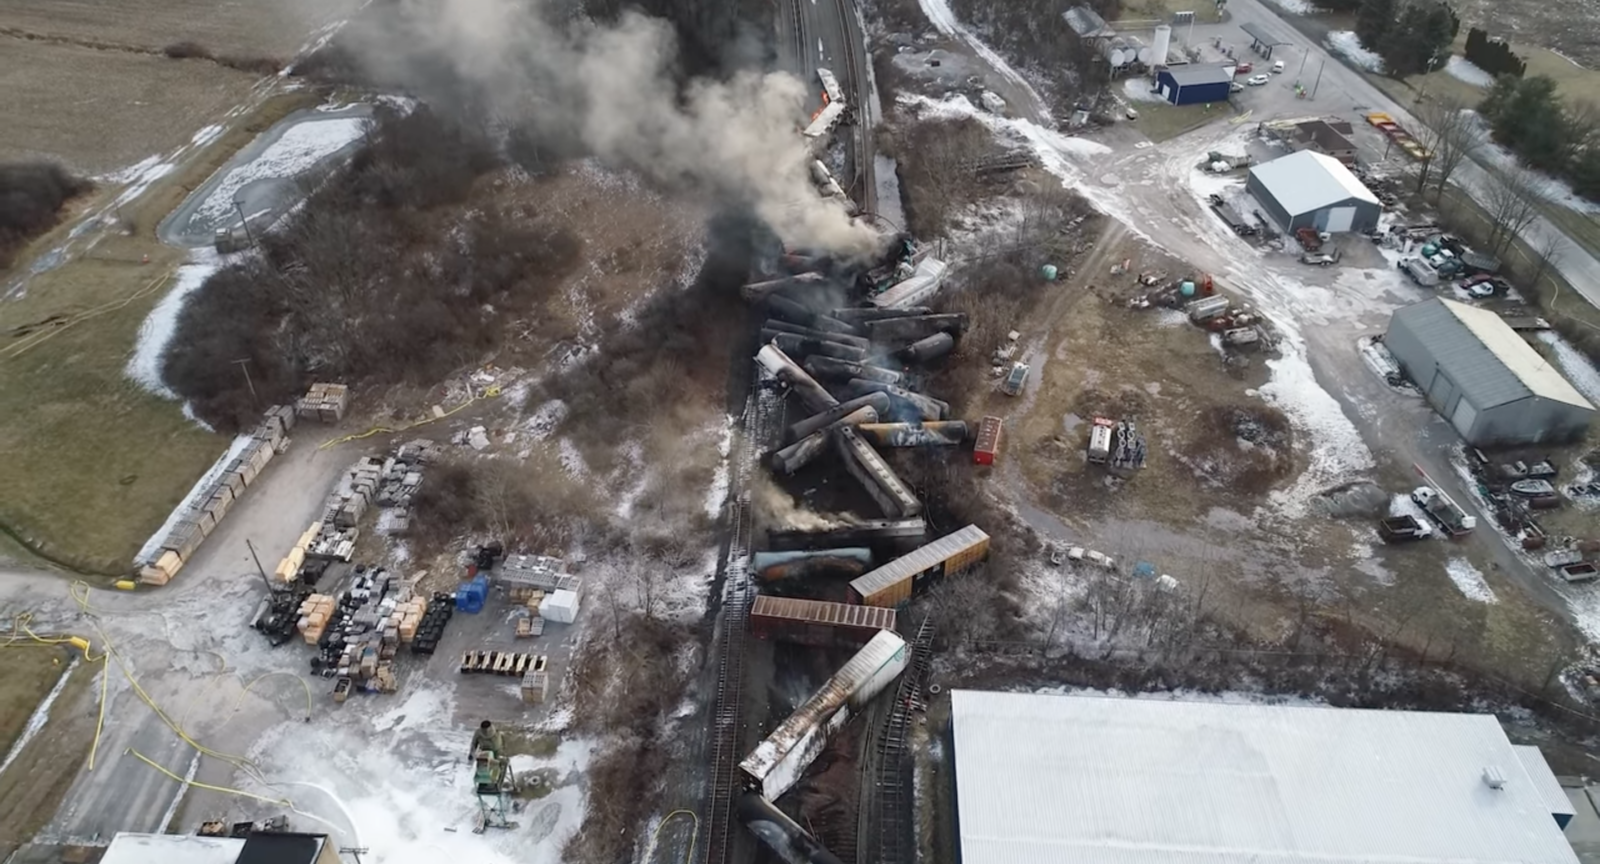 An Overview of the Norfolk Southern Train Derailment and Hazardous